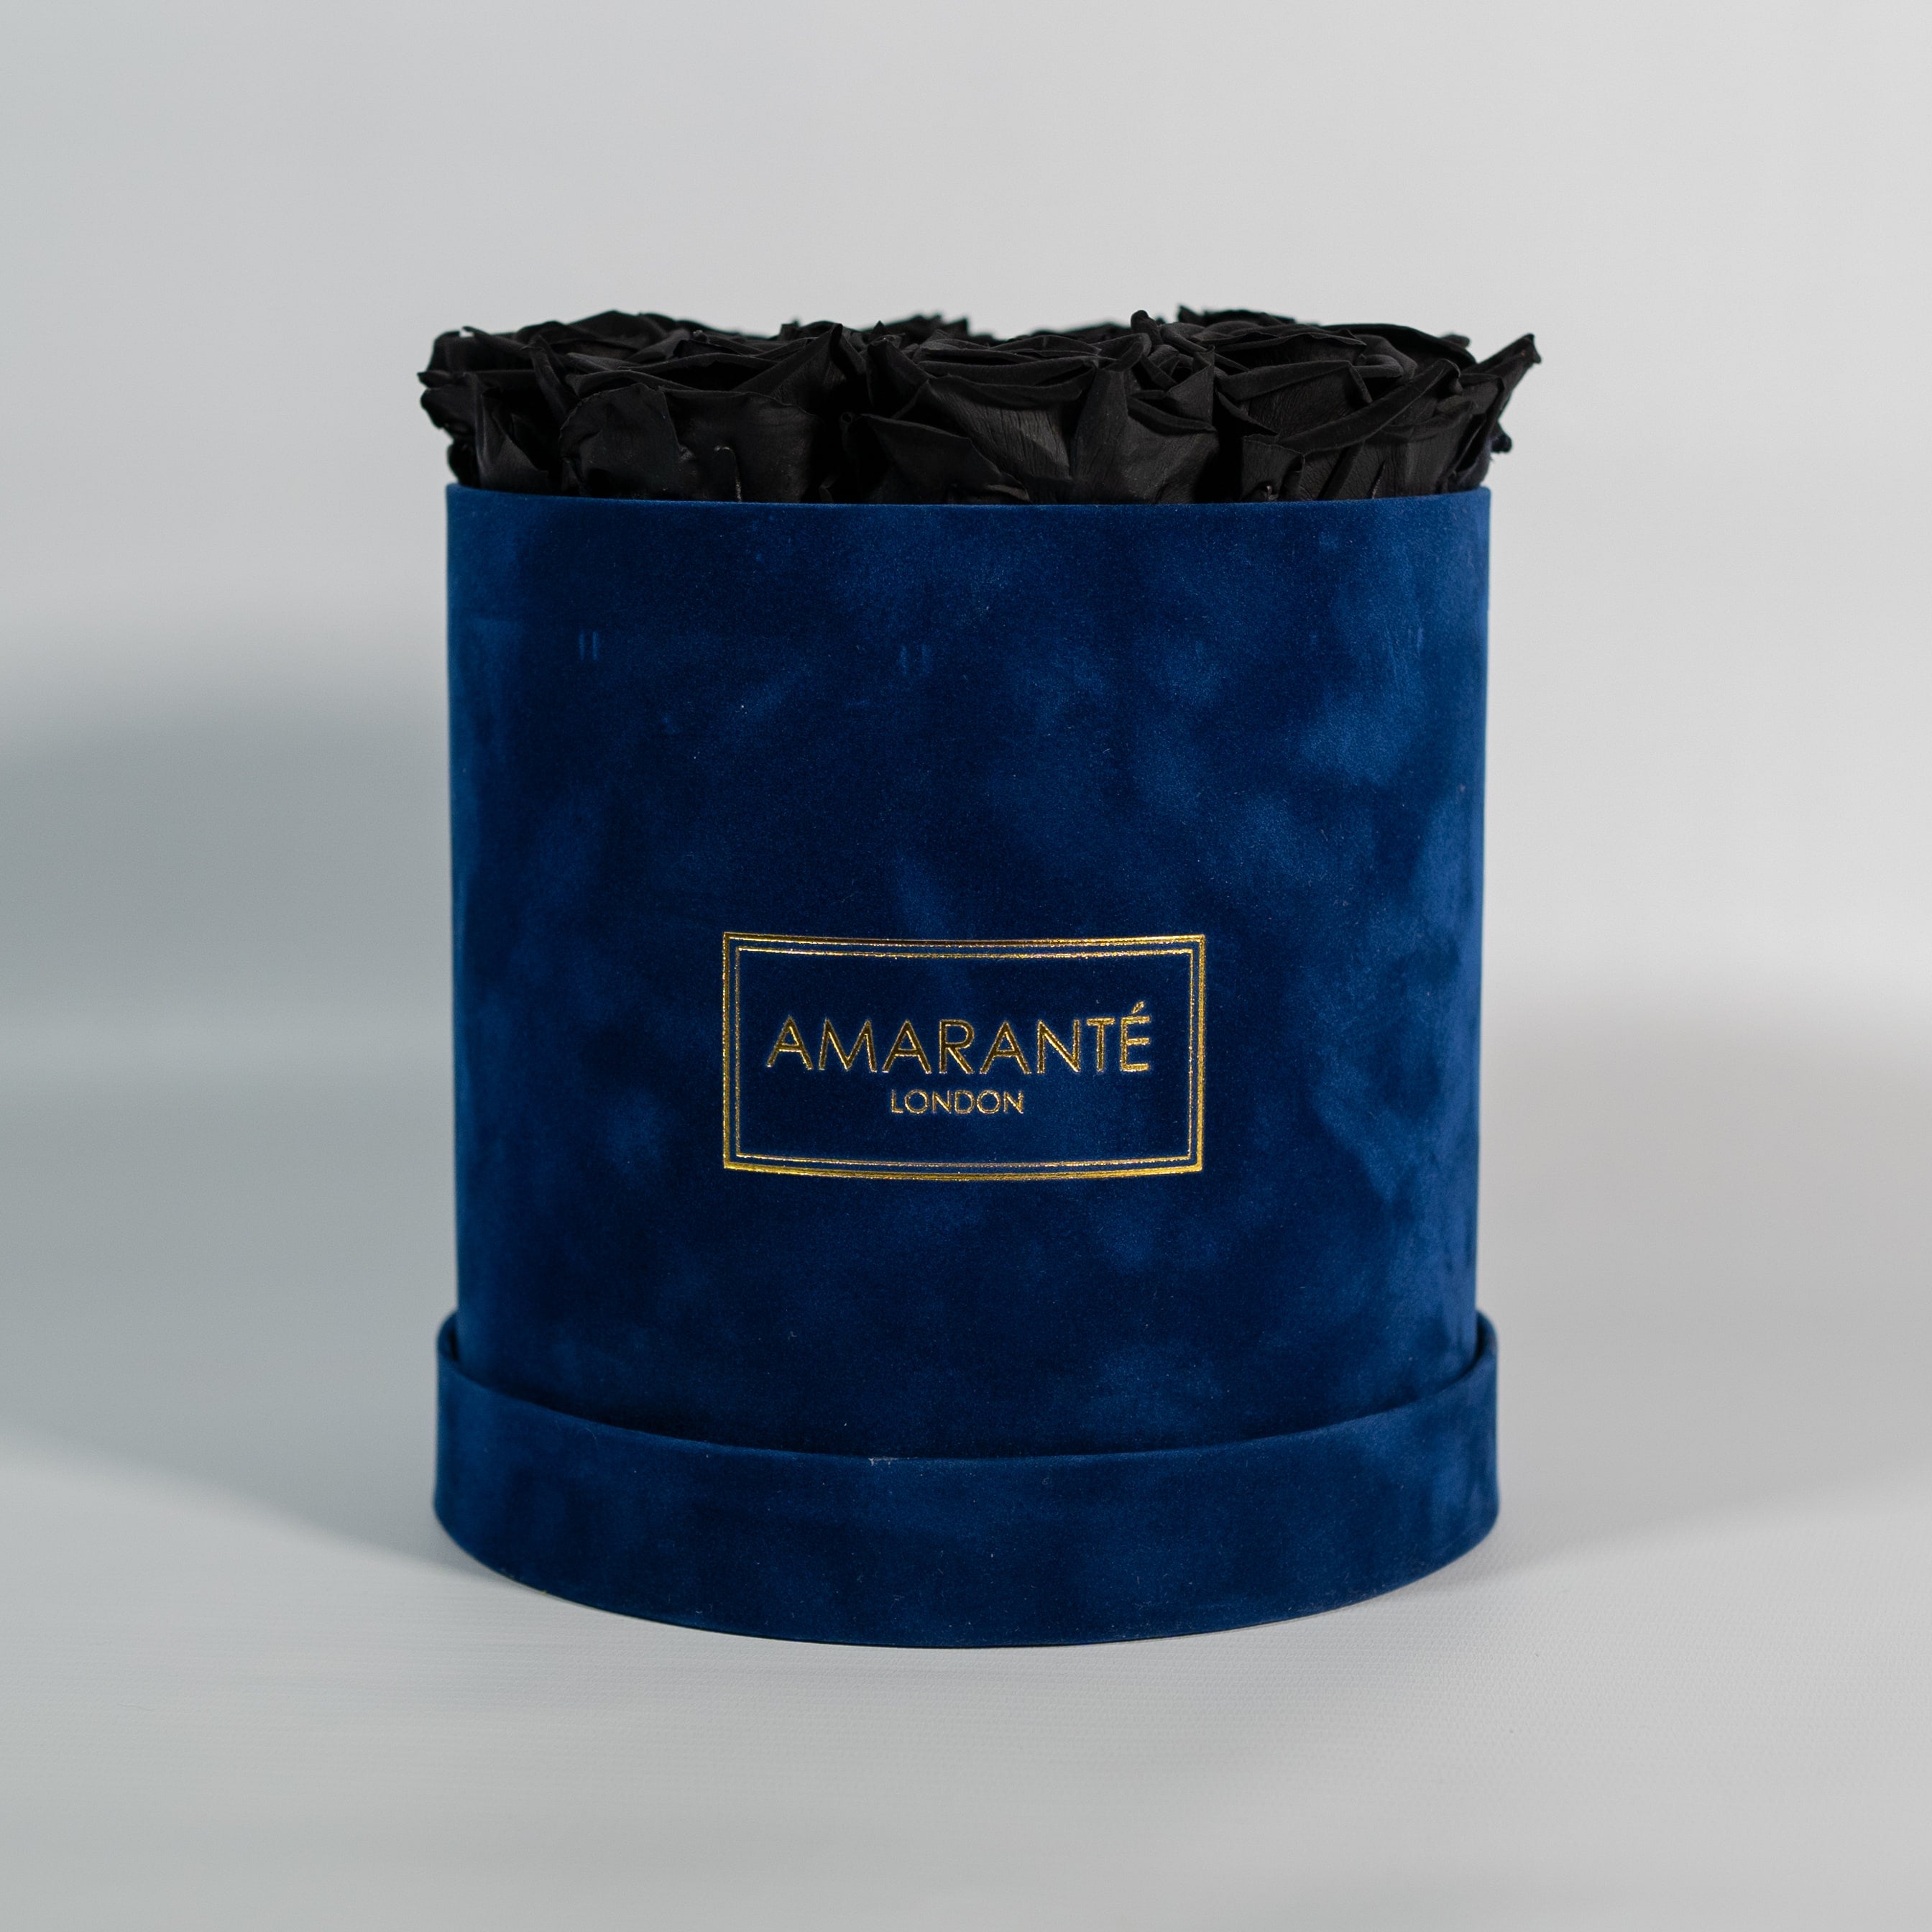 Gorgeous black Roses imbedded in a stylish blue box 